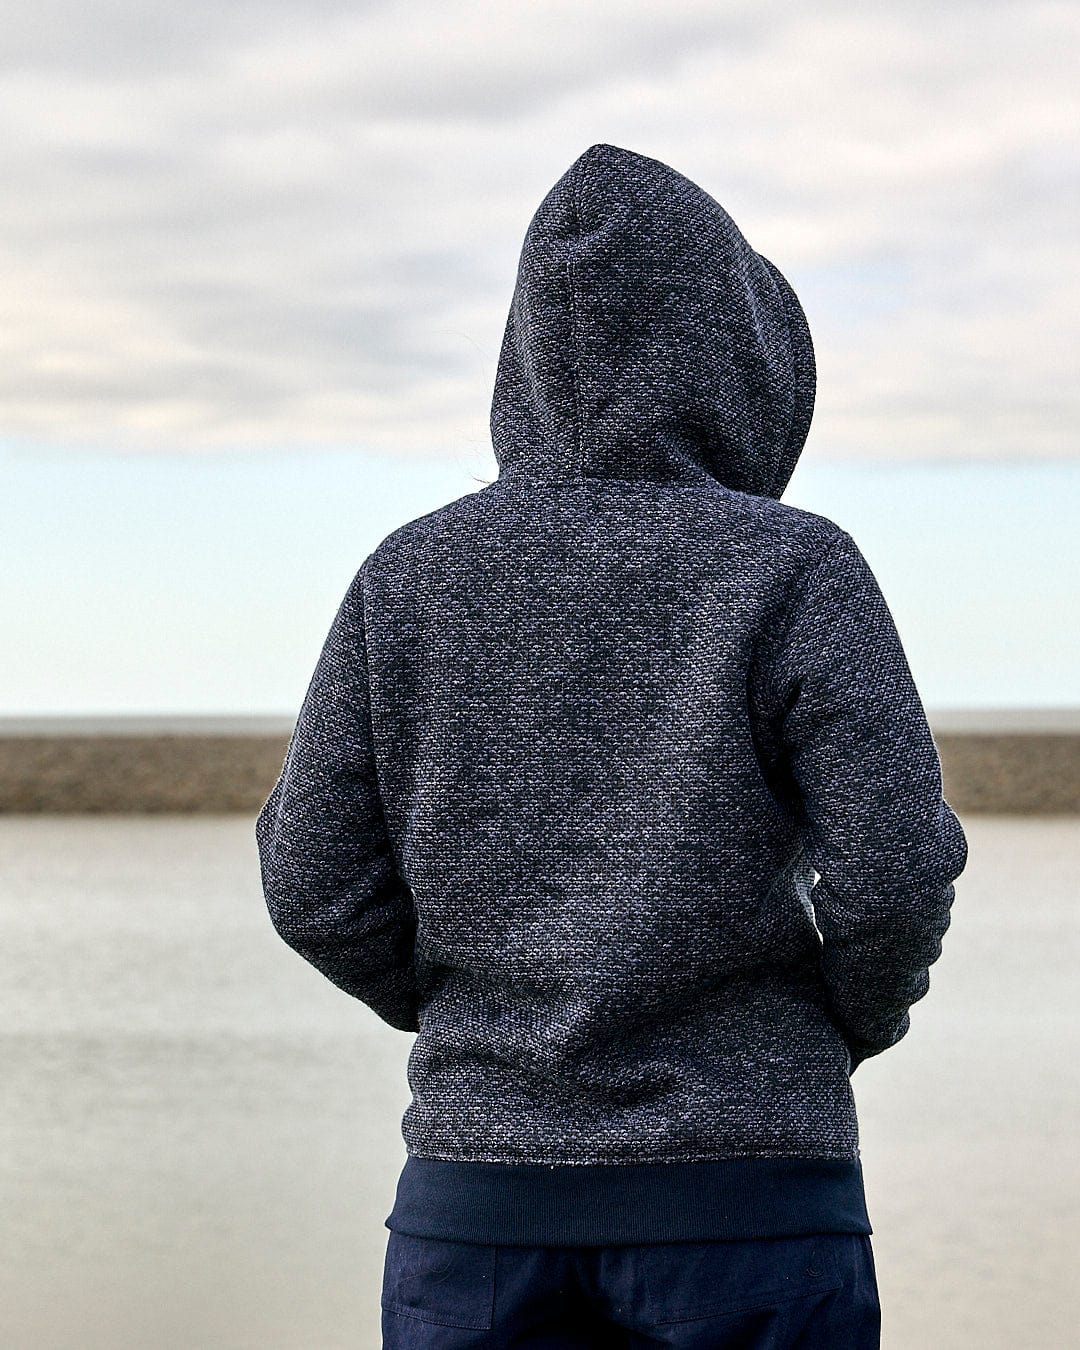 A person wearing a Saltrock - Jazz Womens Borg Lined Zip Hoodie in Dark Blue, looking at the water.